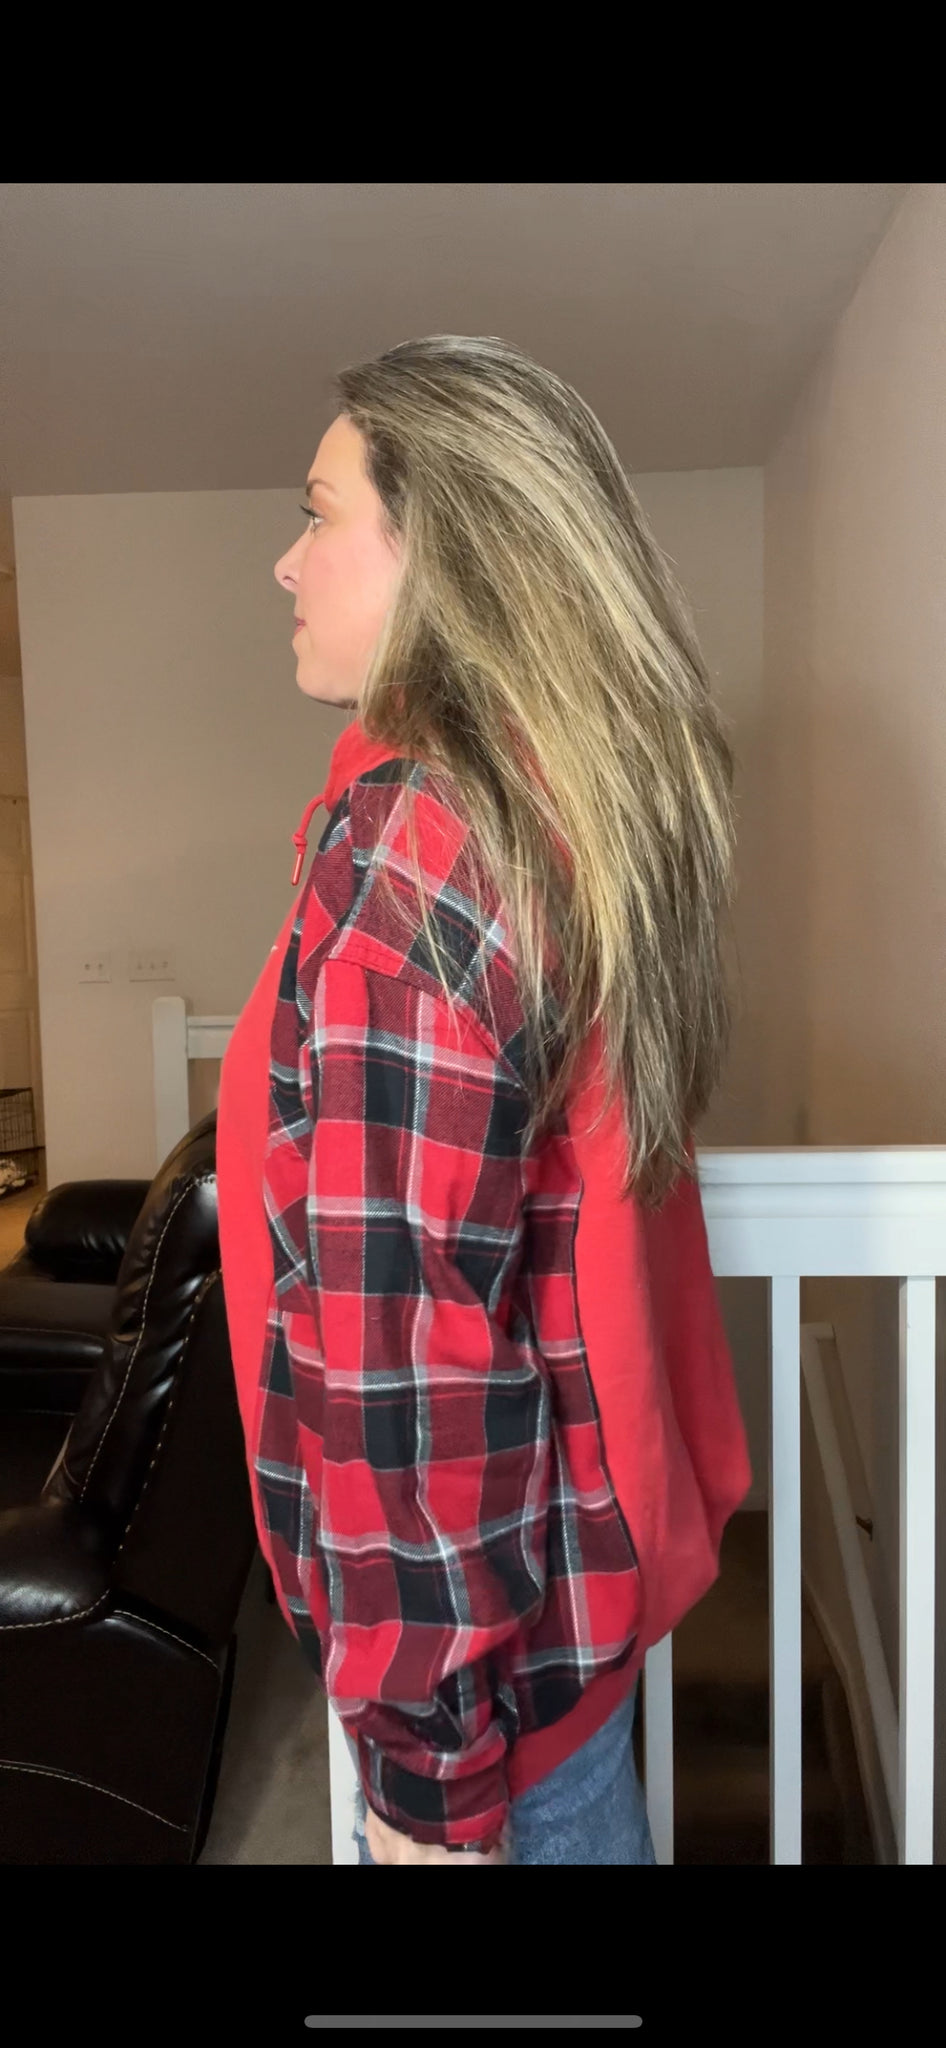 Upcycled Red Nike – women’s XL – thick sweatshirt with flannel sleeves ￼